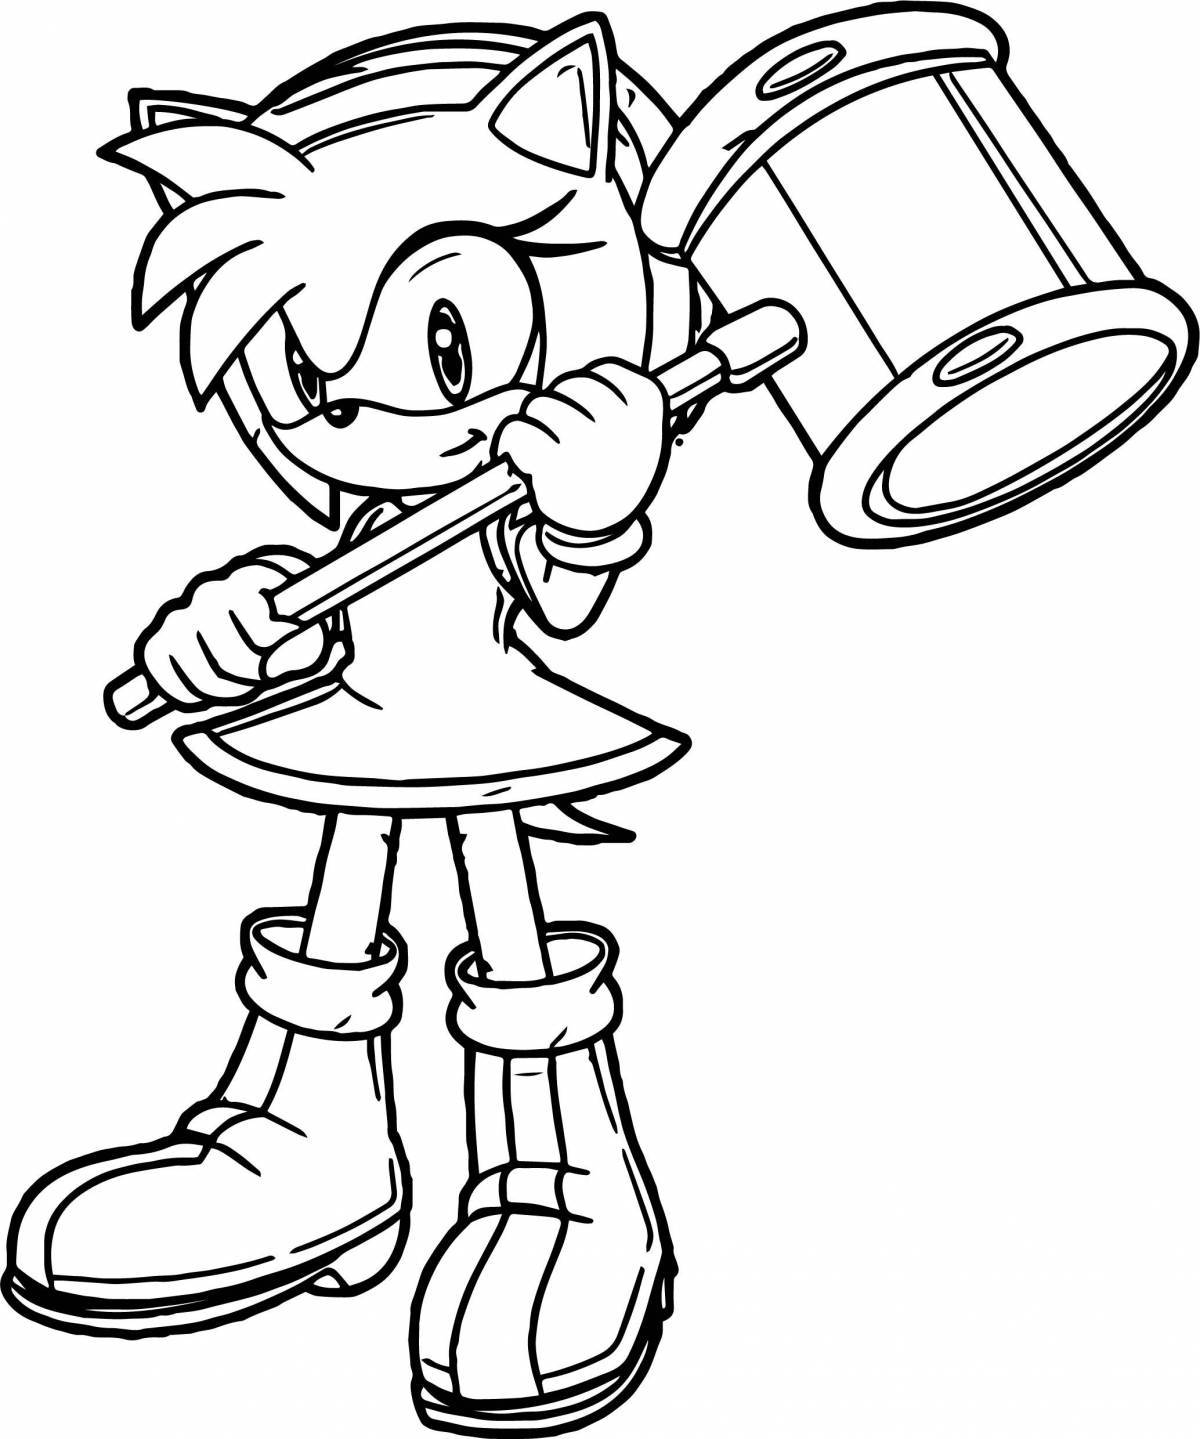 Amy rose's adorable coloring page